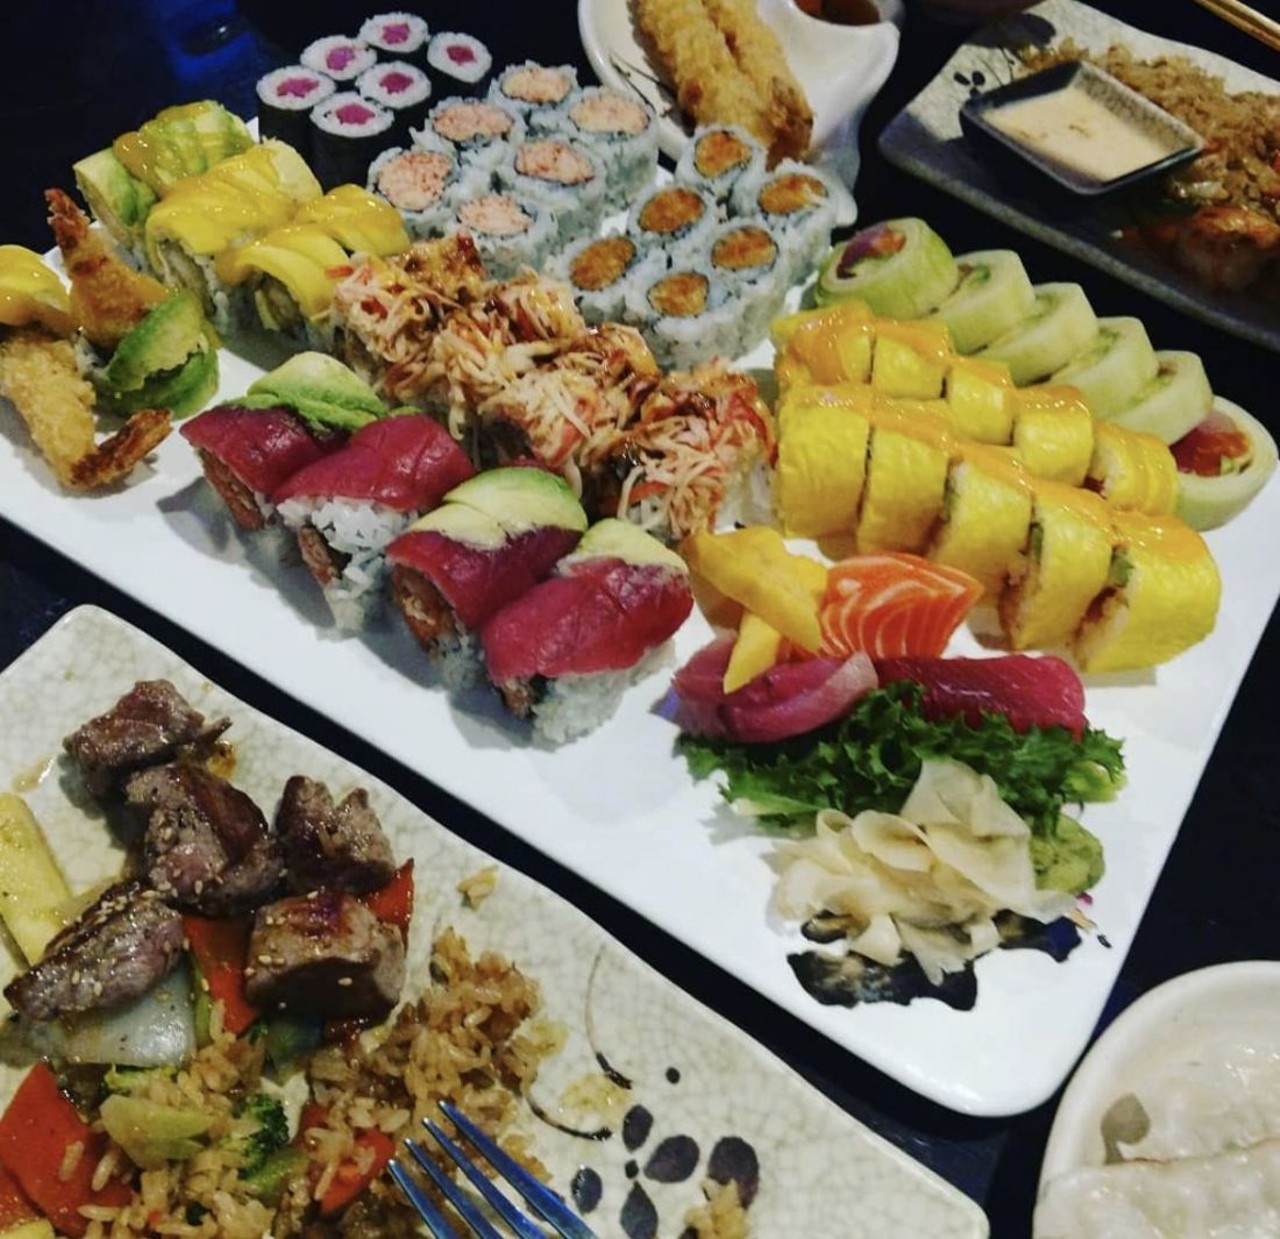 Kintaro
Multiple Locations
“Do u count Buffets? I regularly go to Kintaro in Fairview Park/Brooklyn and for 27$ it's all you can eat Sushi and Hibachi. This is all sashimi, sushi rolls, Nigiri, specialty rolls, fried rice, tempura, hibachi, soup, salad, and more.”
Via 754754/Reddit